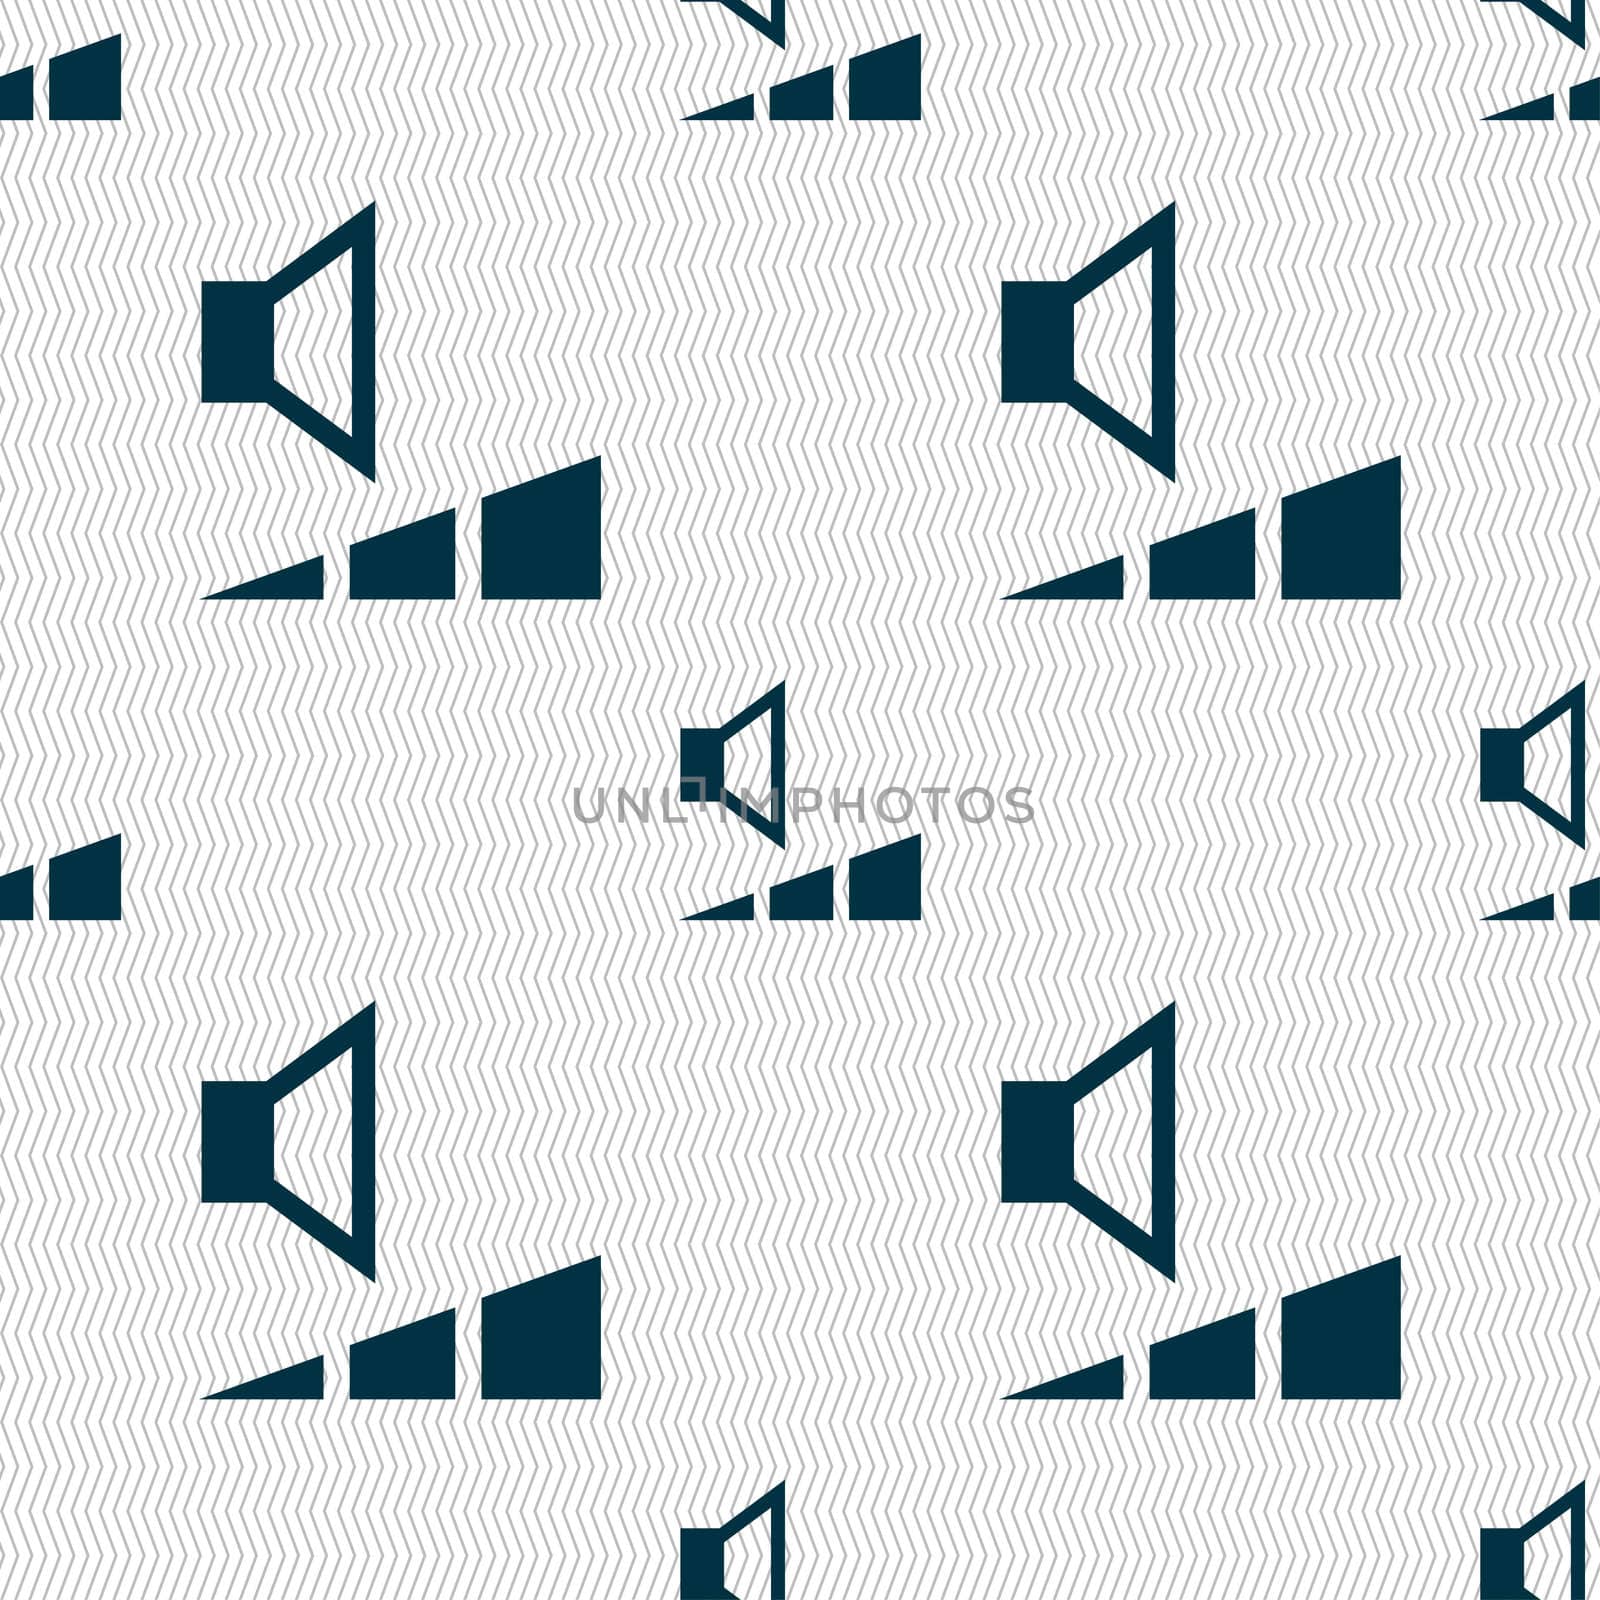 volume, sound icon sign. Seamless pattern with geometric texture. illustration